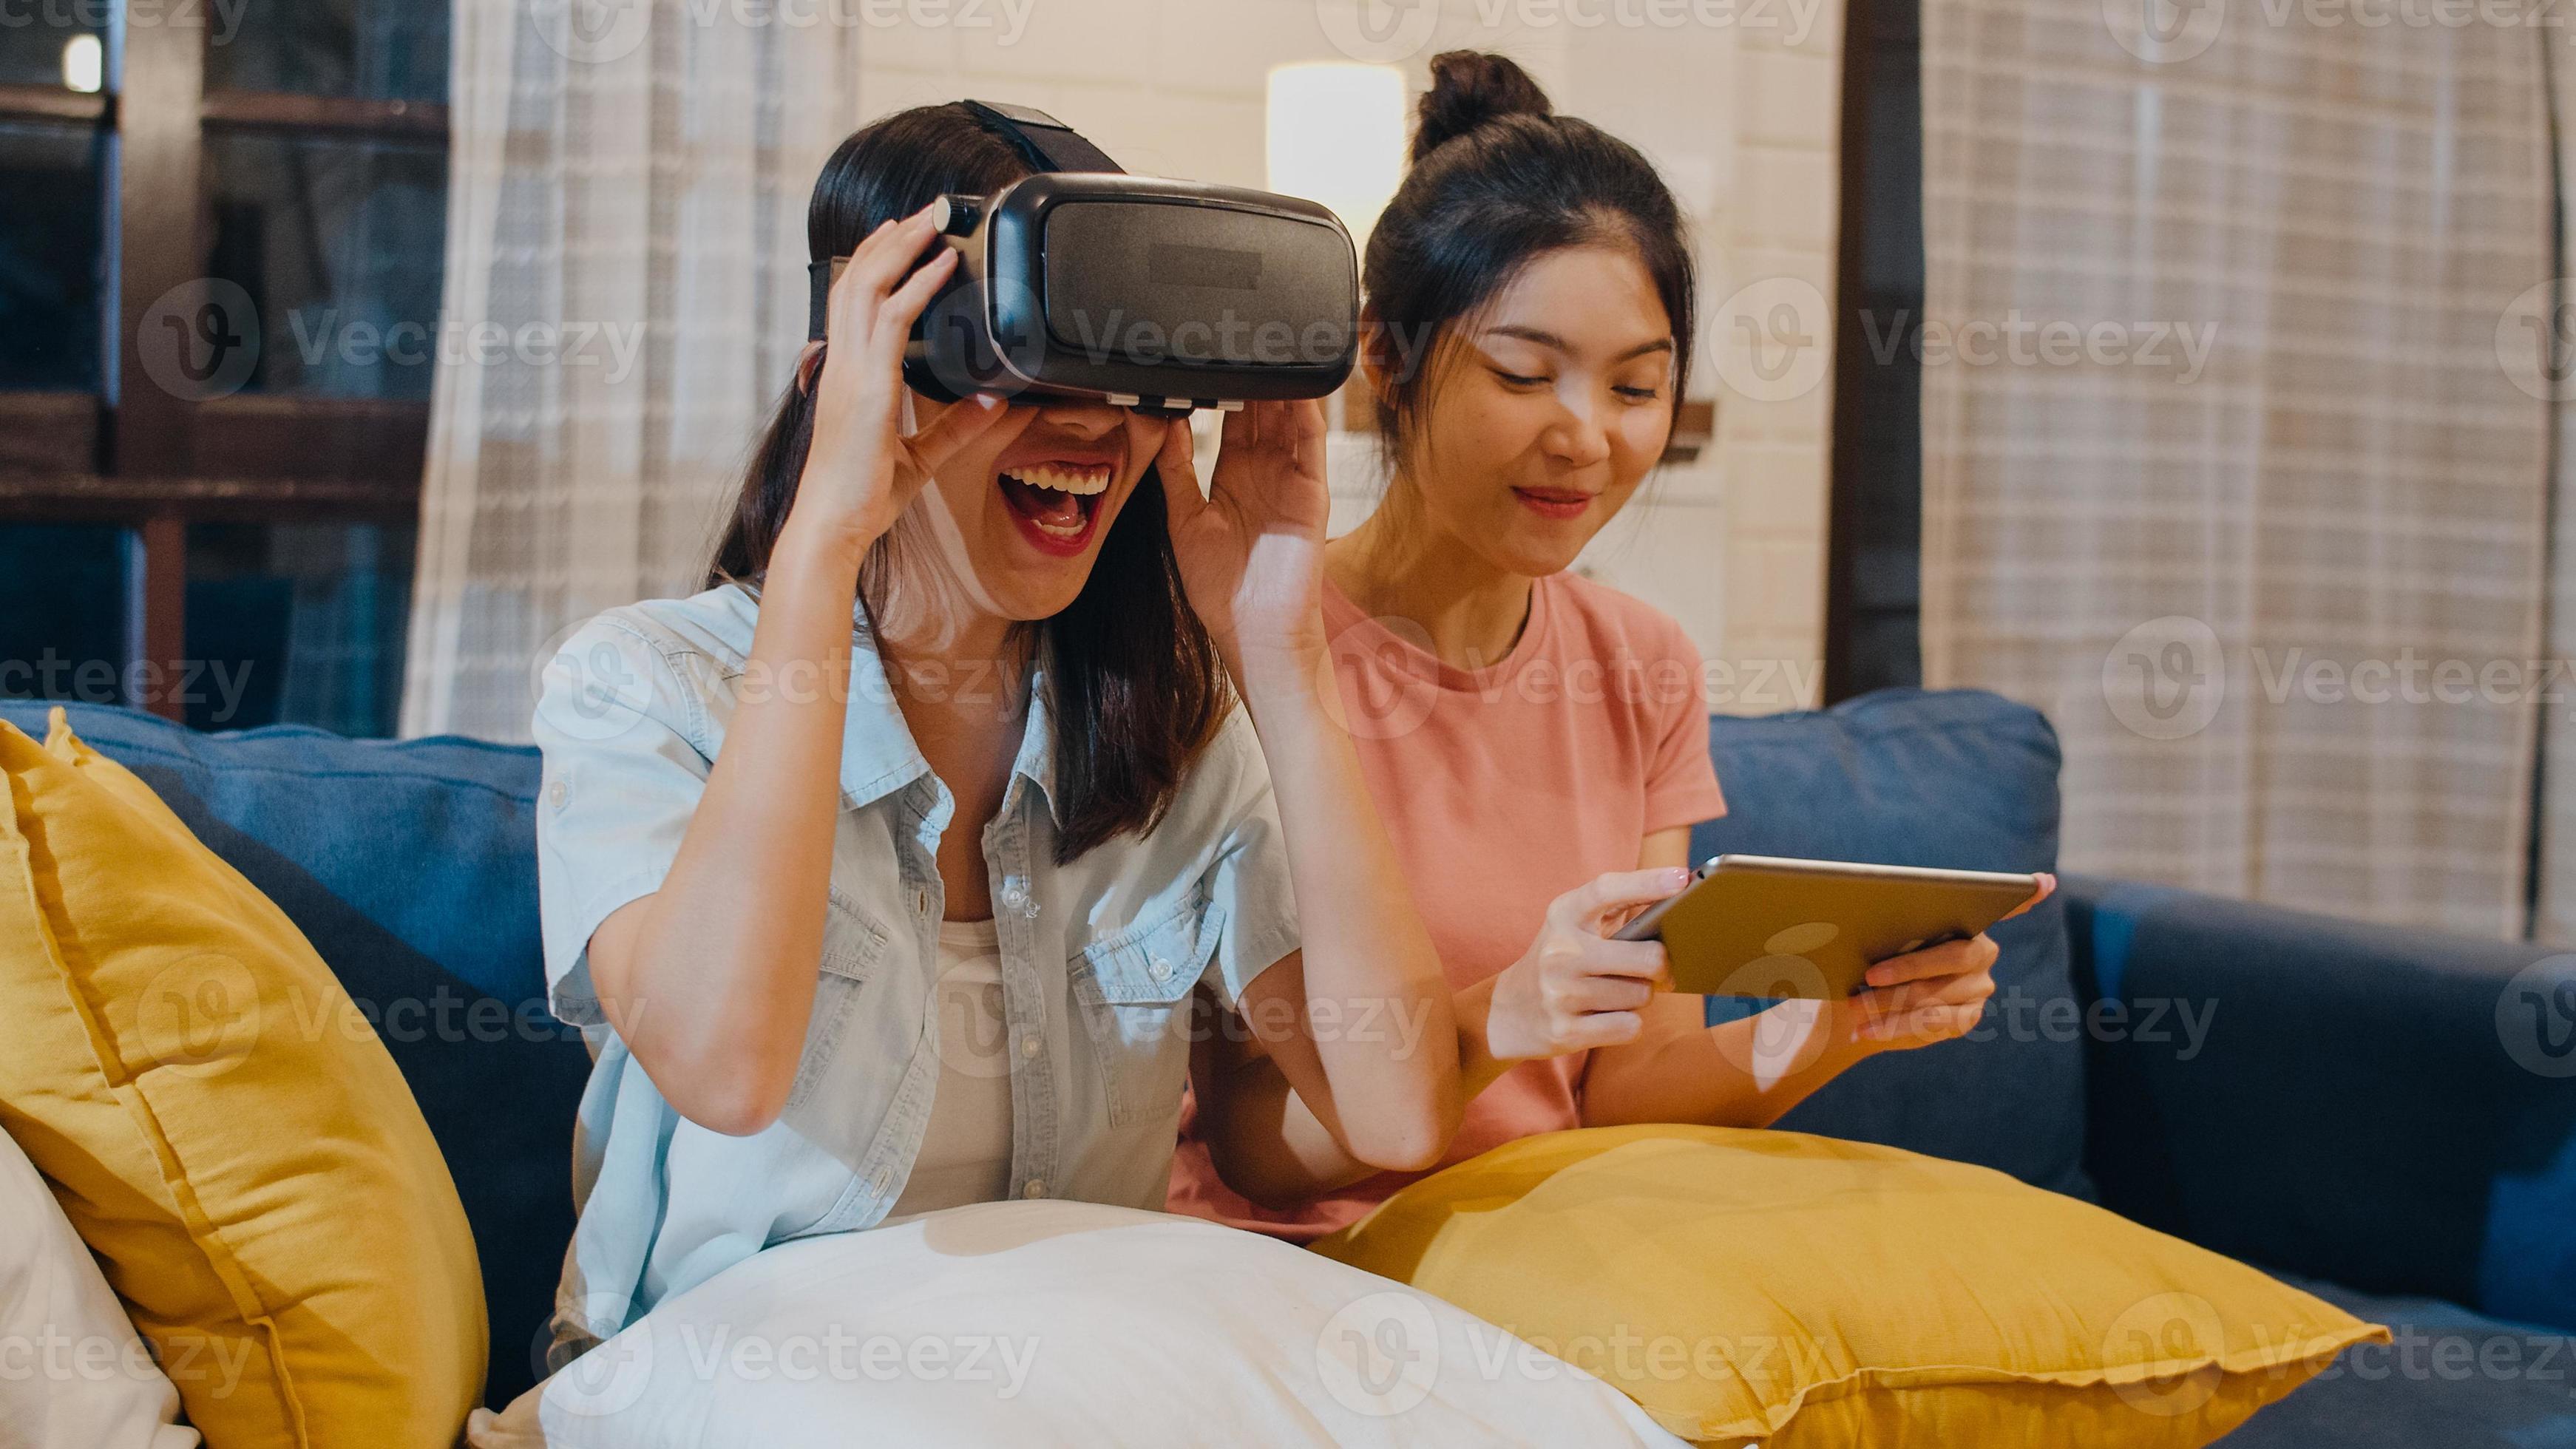 George Bernard Konvention Dum Lesbian lgbt women couple using tablet at home, Asian female feeling happy  using laptop and VR playing games together while lying sofa in living room  in night. Lover celebrate holiday concept. 5486894